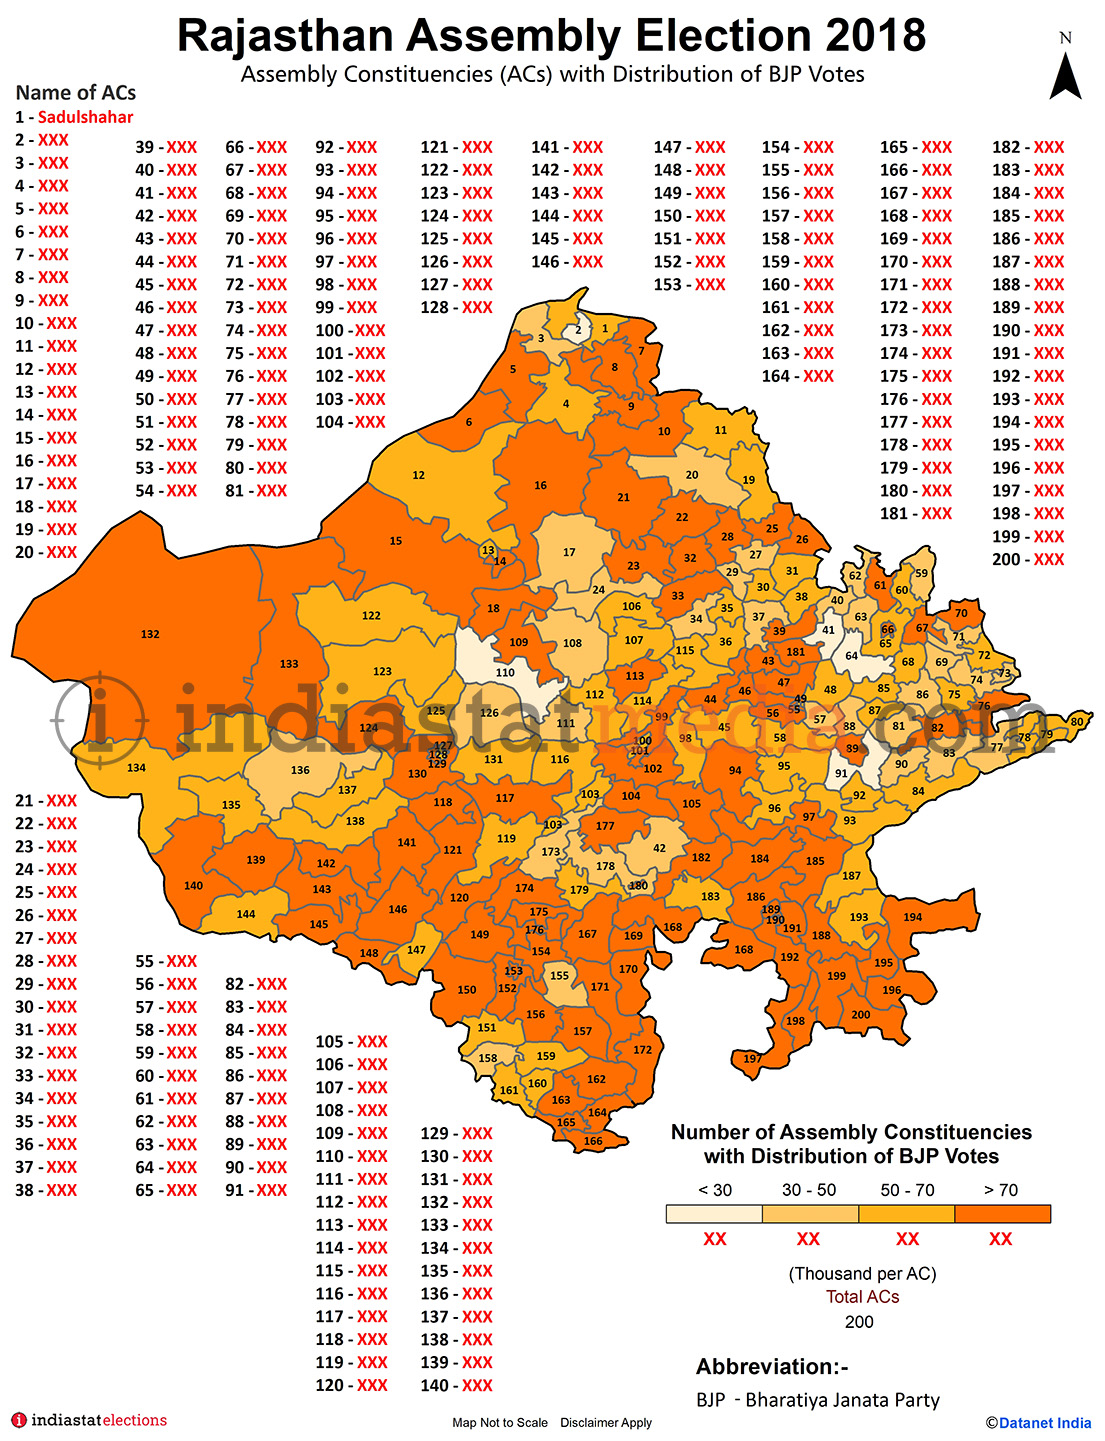 Distribution of BJP Votes by Constituencies in Rajasthan (Assembly Election - 2018)